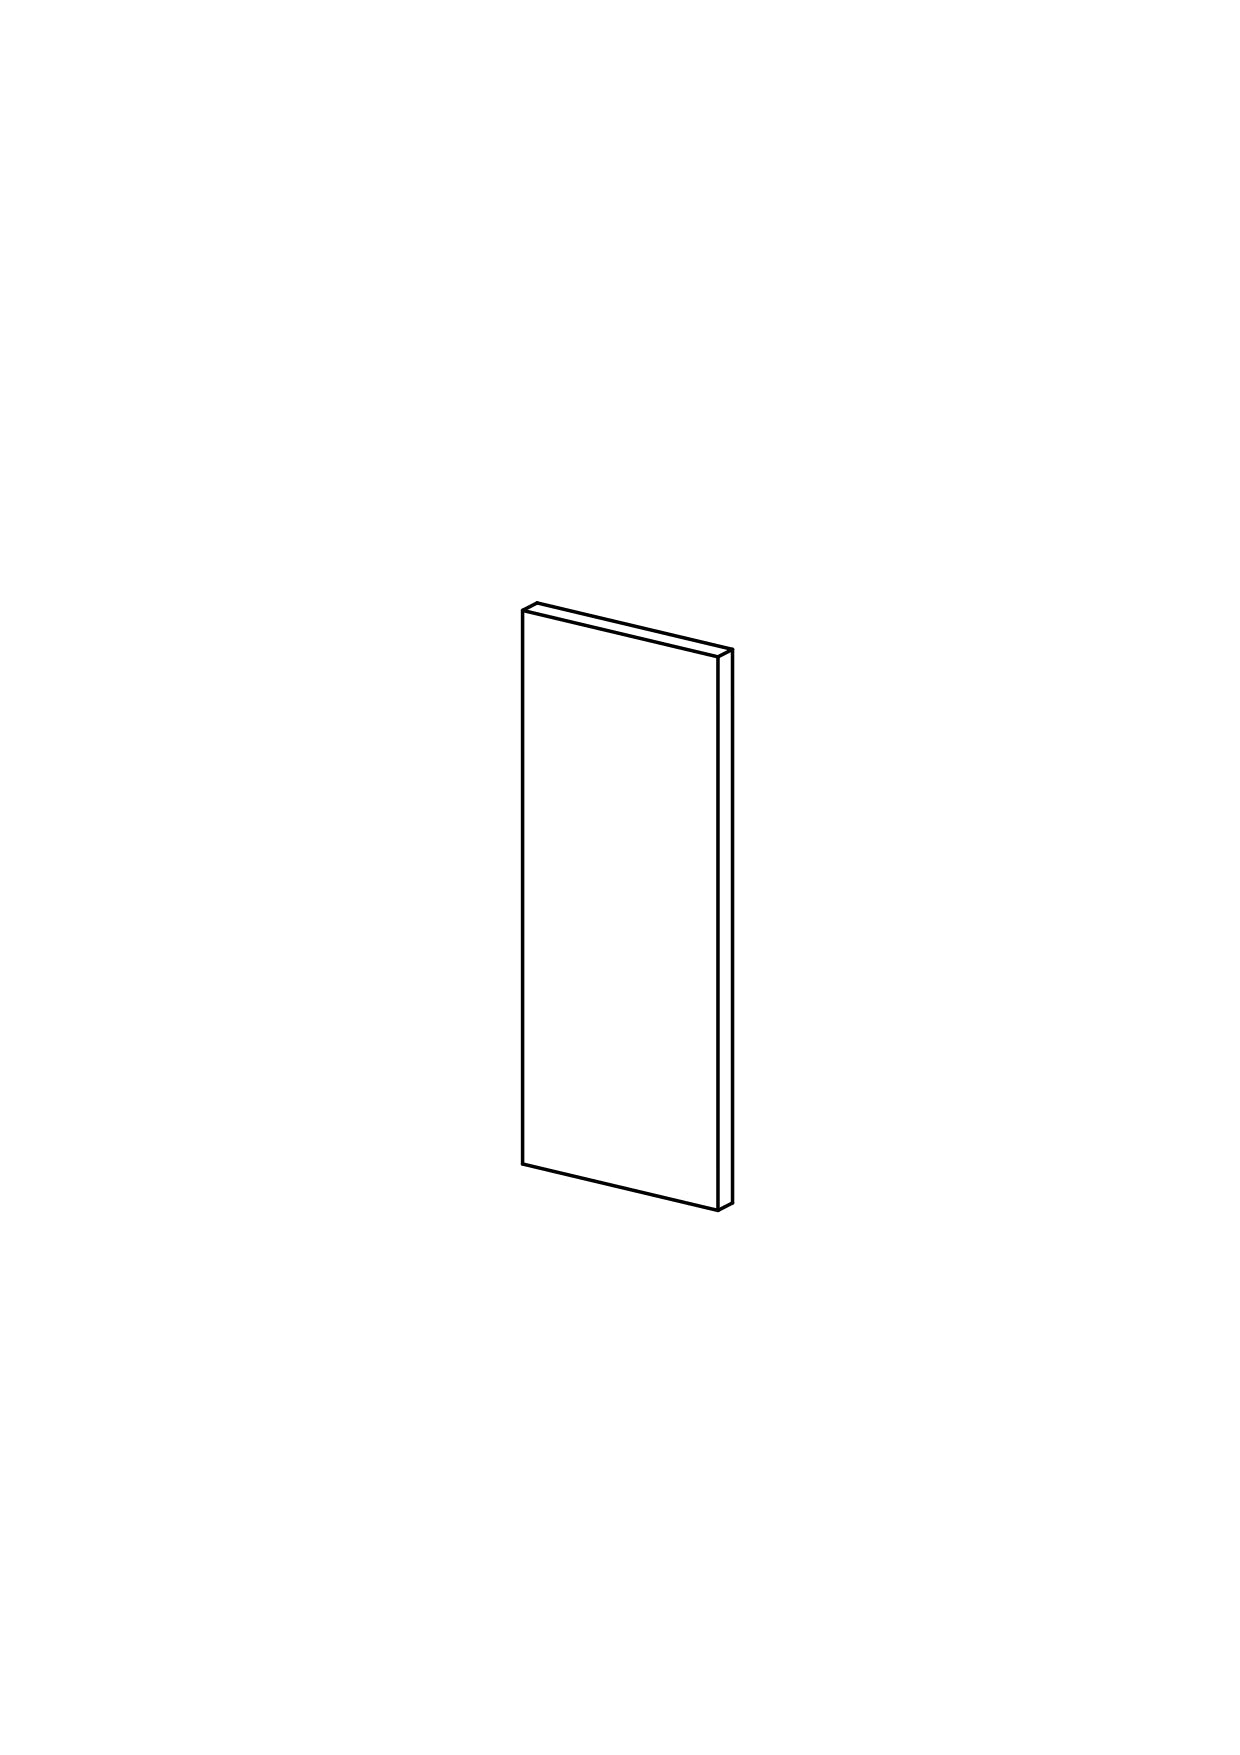 40x100 - Cover Panel - Plain - Unpainted (Raw) - METOD